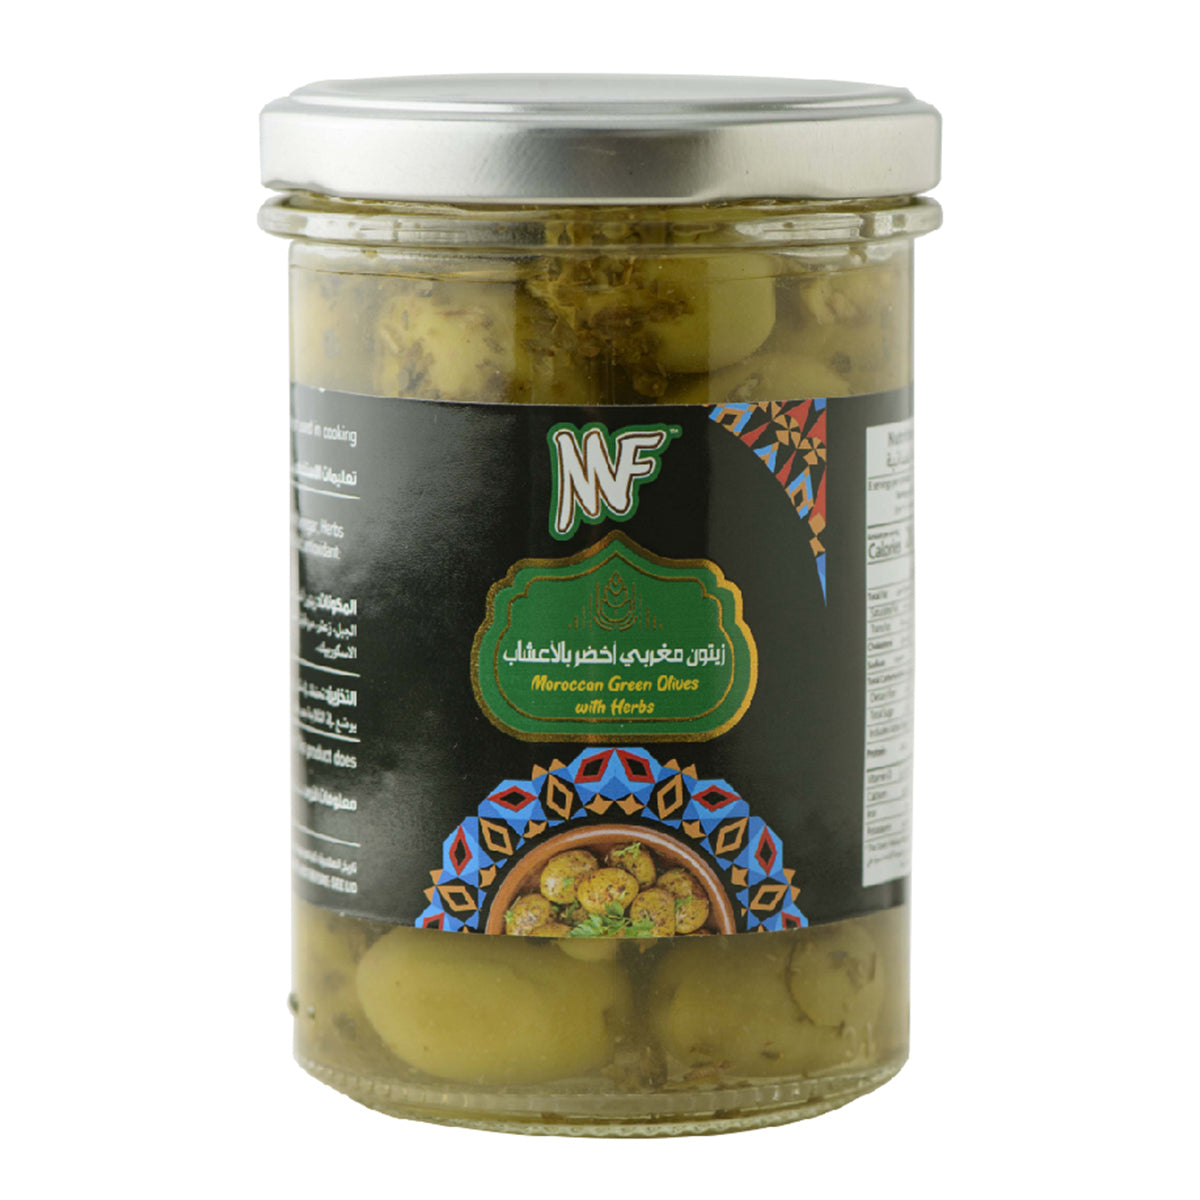 MF Green Olives with Herbs 215g